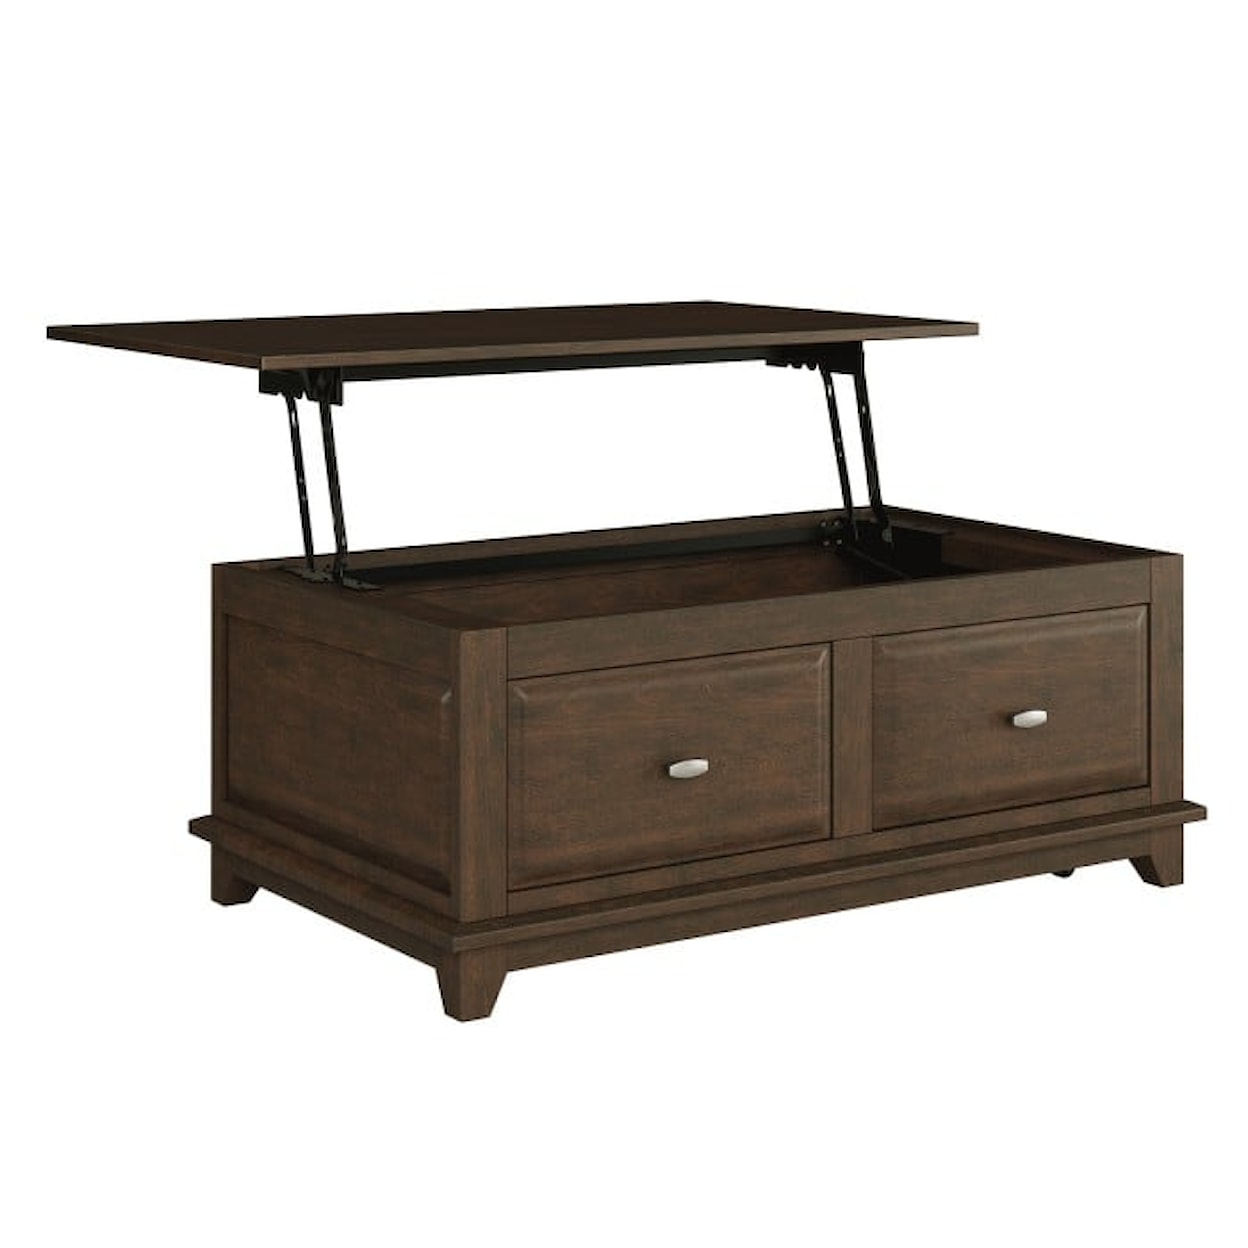 Homelegance Minot Lift Top Cocktail Table